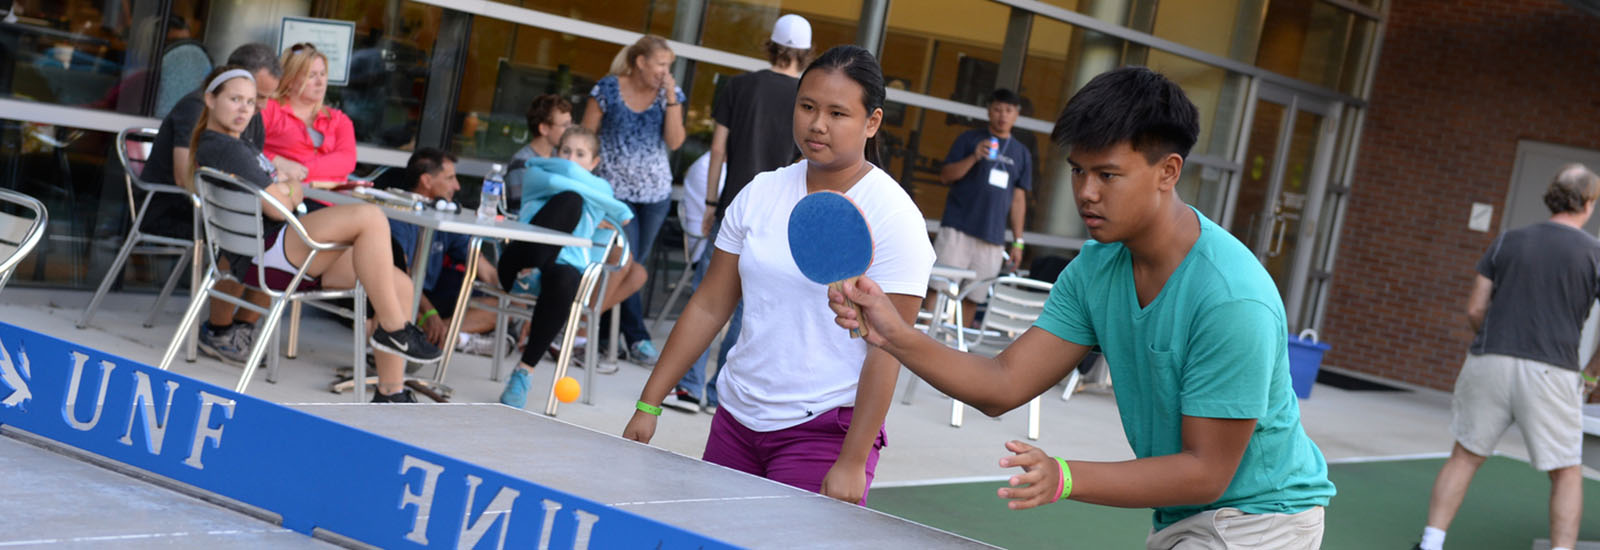 Students playing ping pong on campus